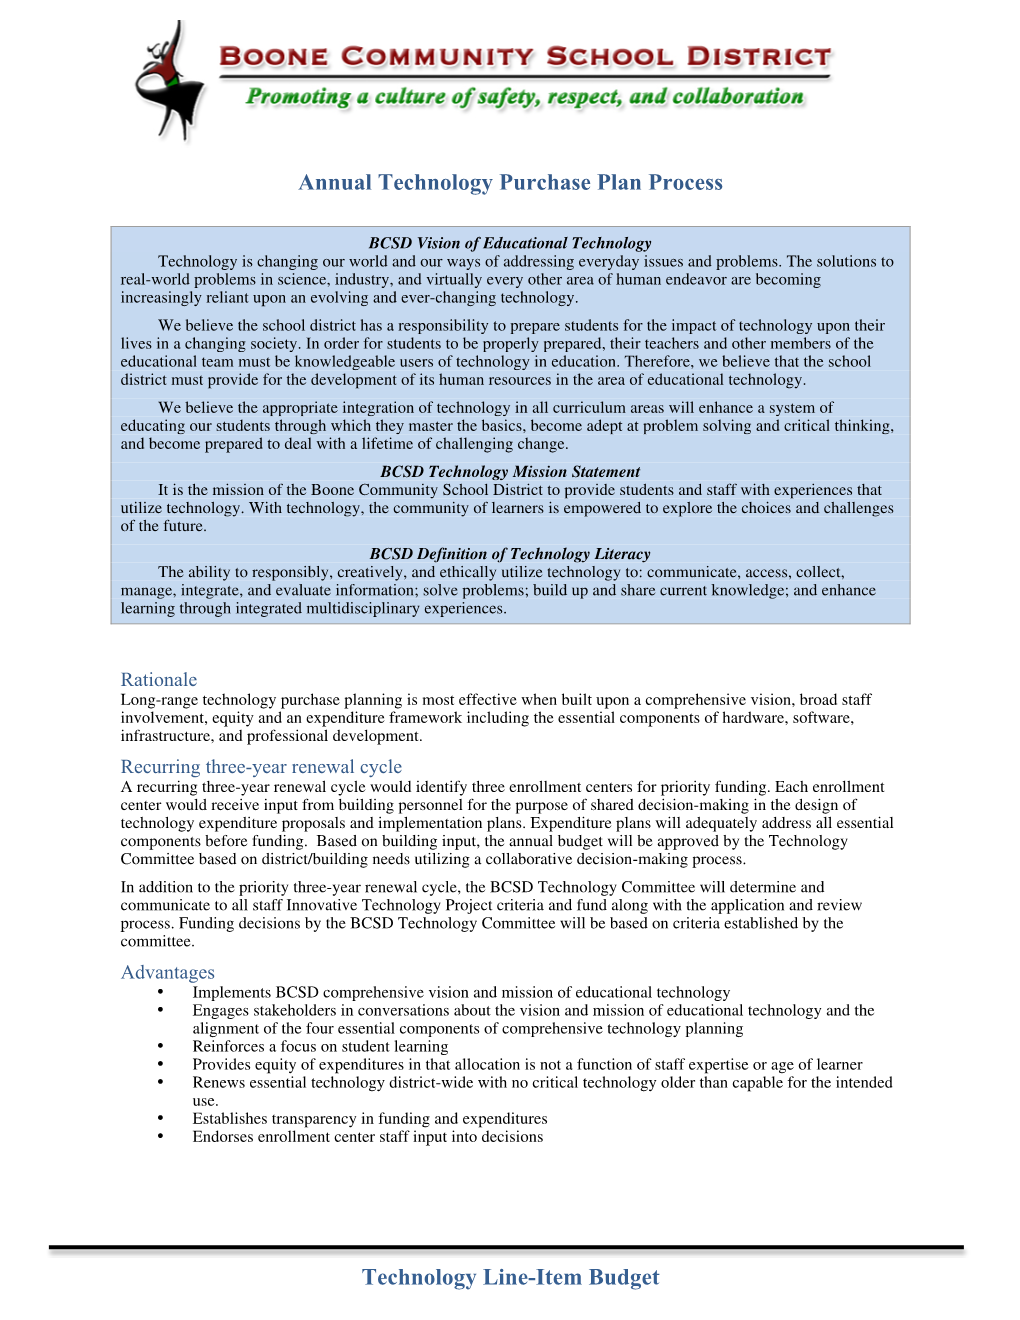 Annual Technology Purchase Plan Process Technology Line-Item Budget